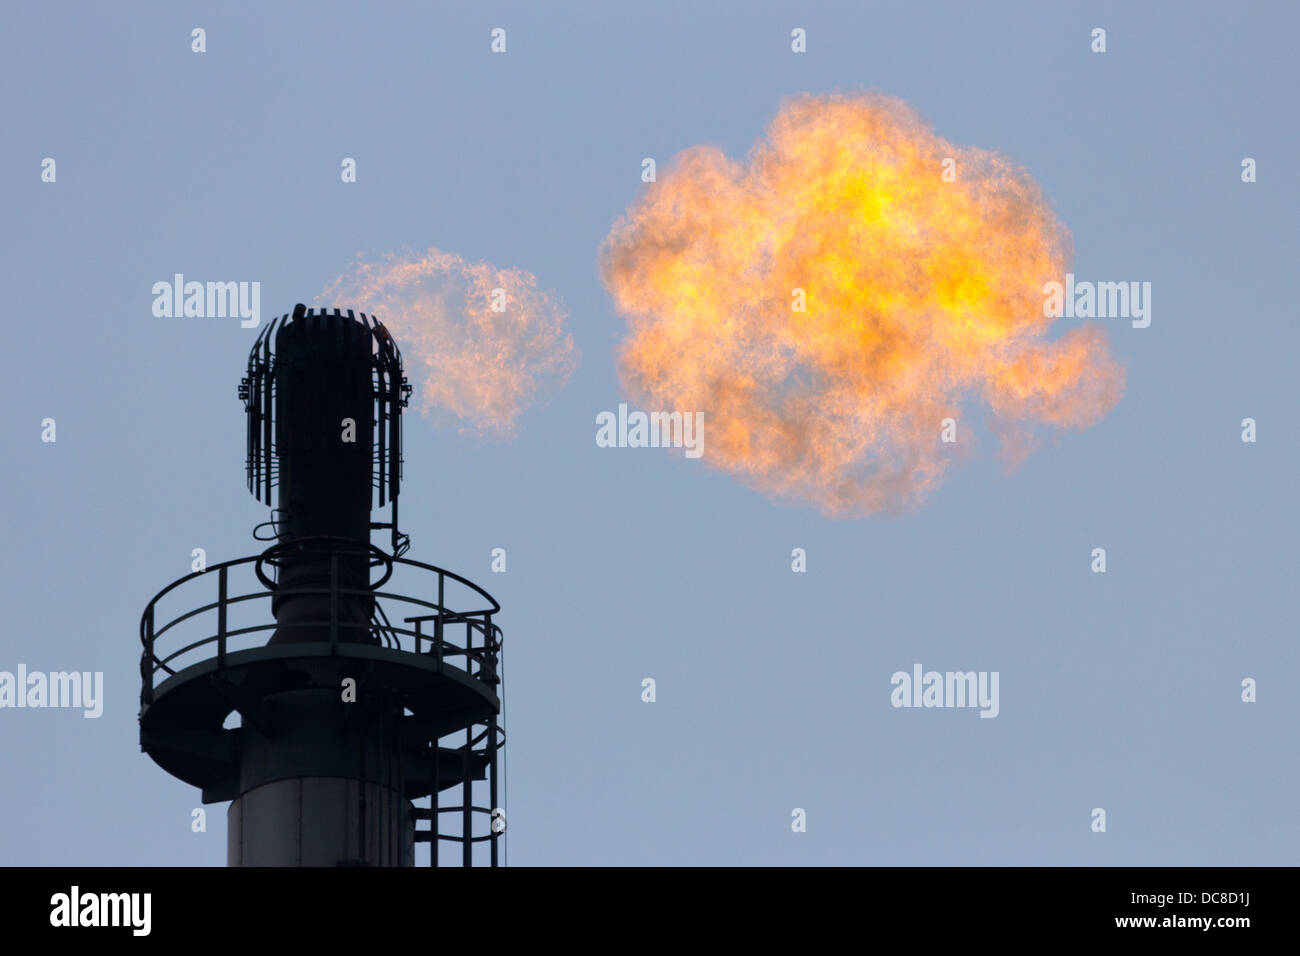 Gas flare at a refinery Stock Photo